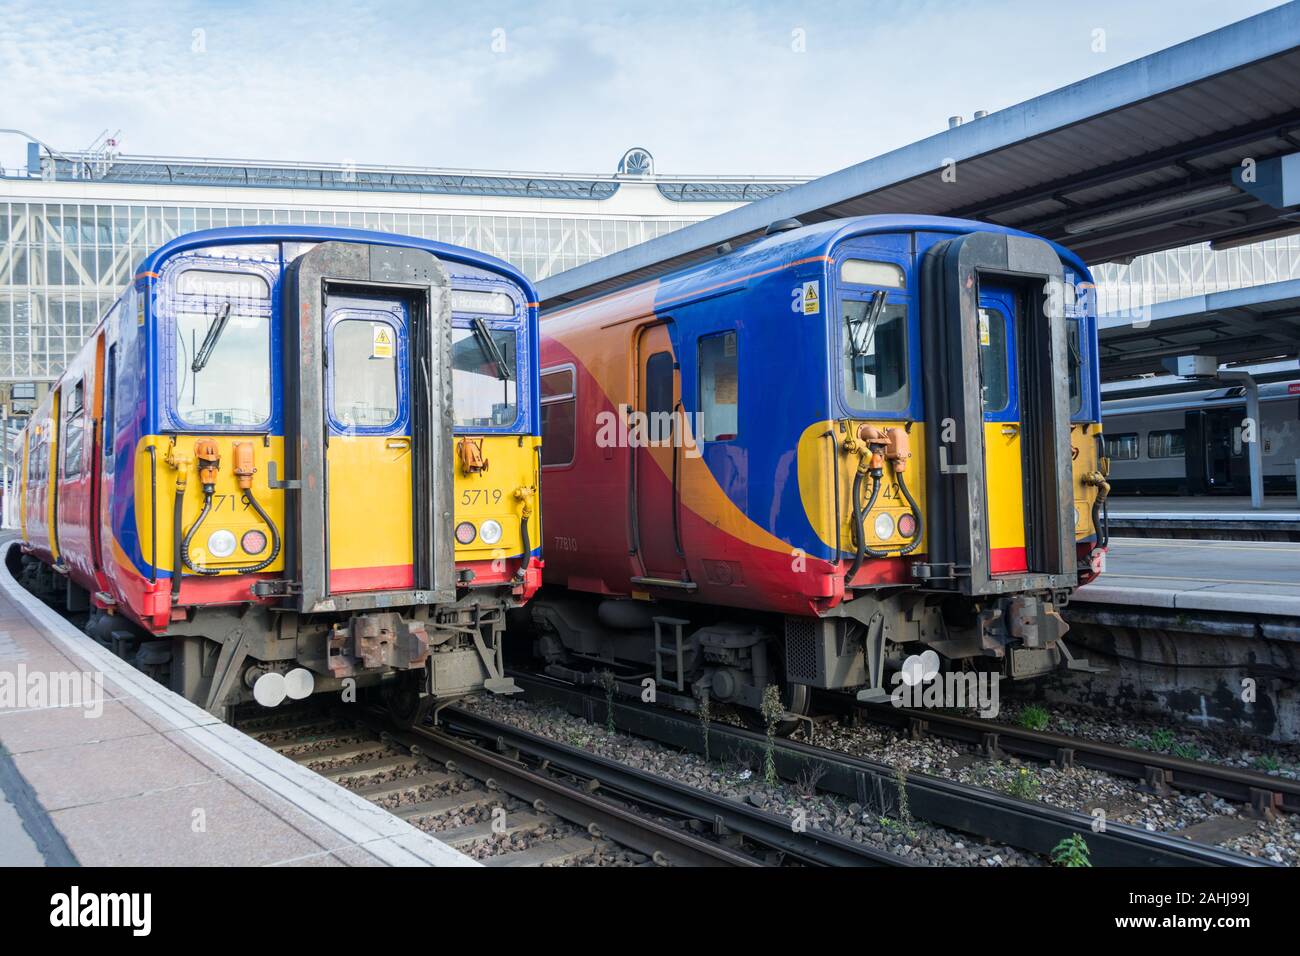 A Class 455 suburban unit waiting to depart from London Waterloo station, Stock Photo